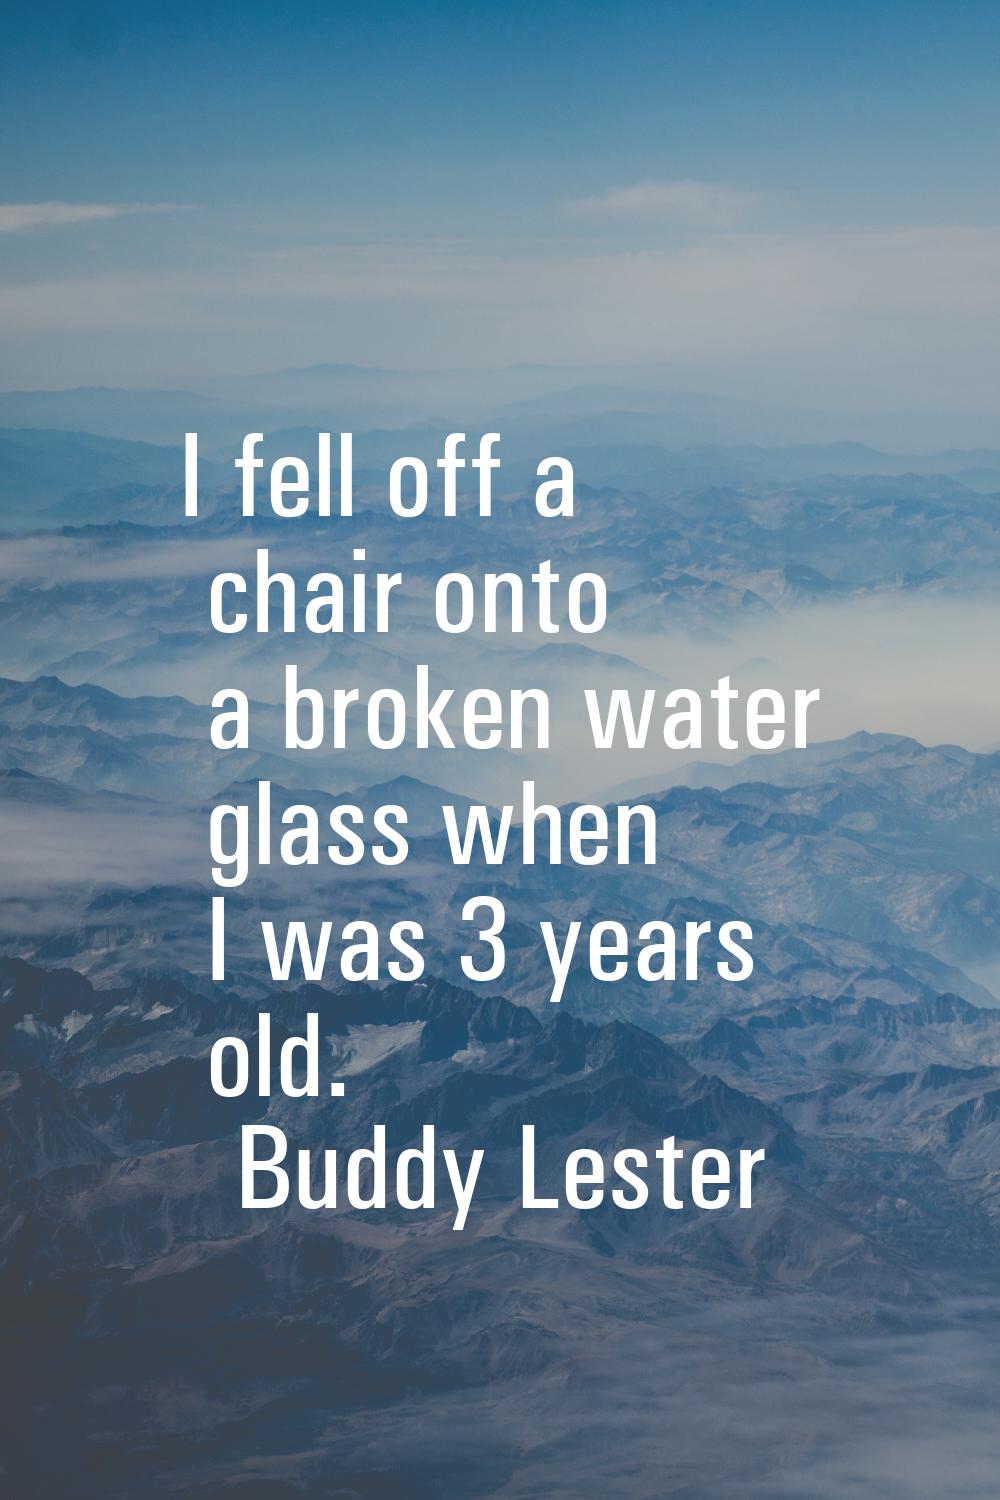 I fell off a chair onto a broken water glass when I was 3 years old.